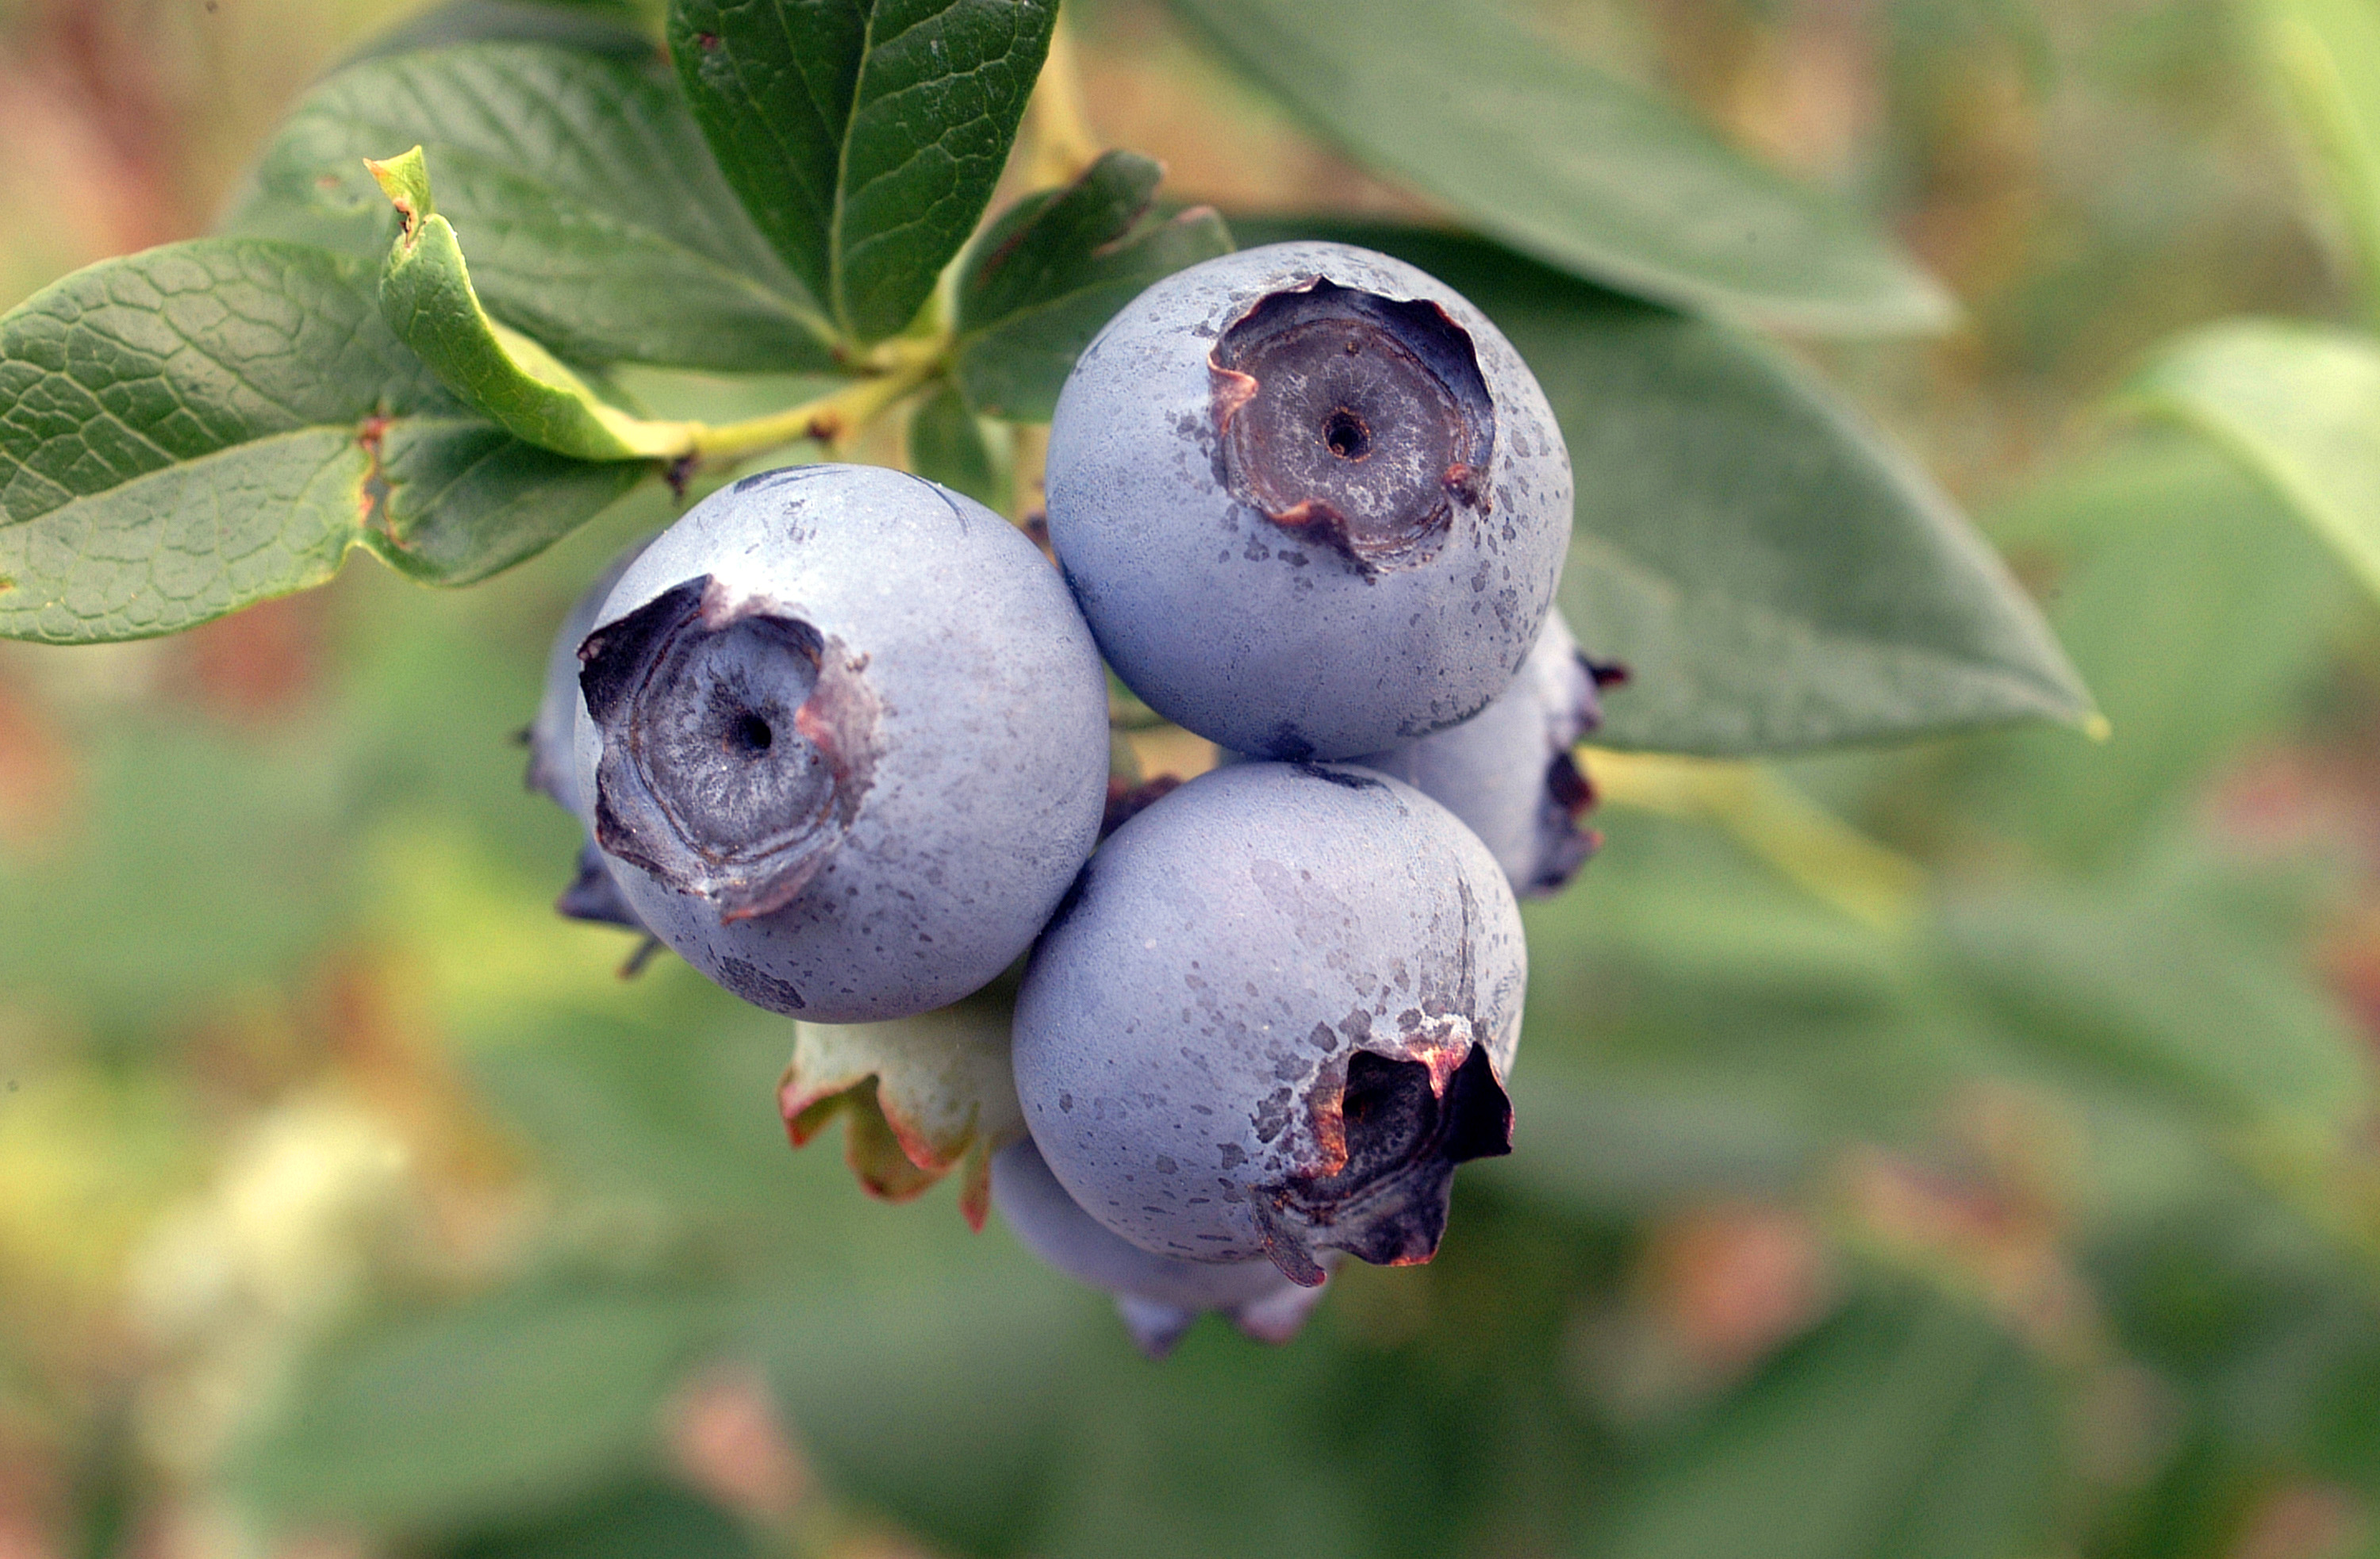 Love Blueberries? Thank the Blueberry Bee!